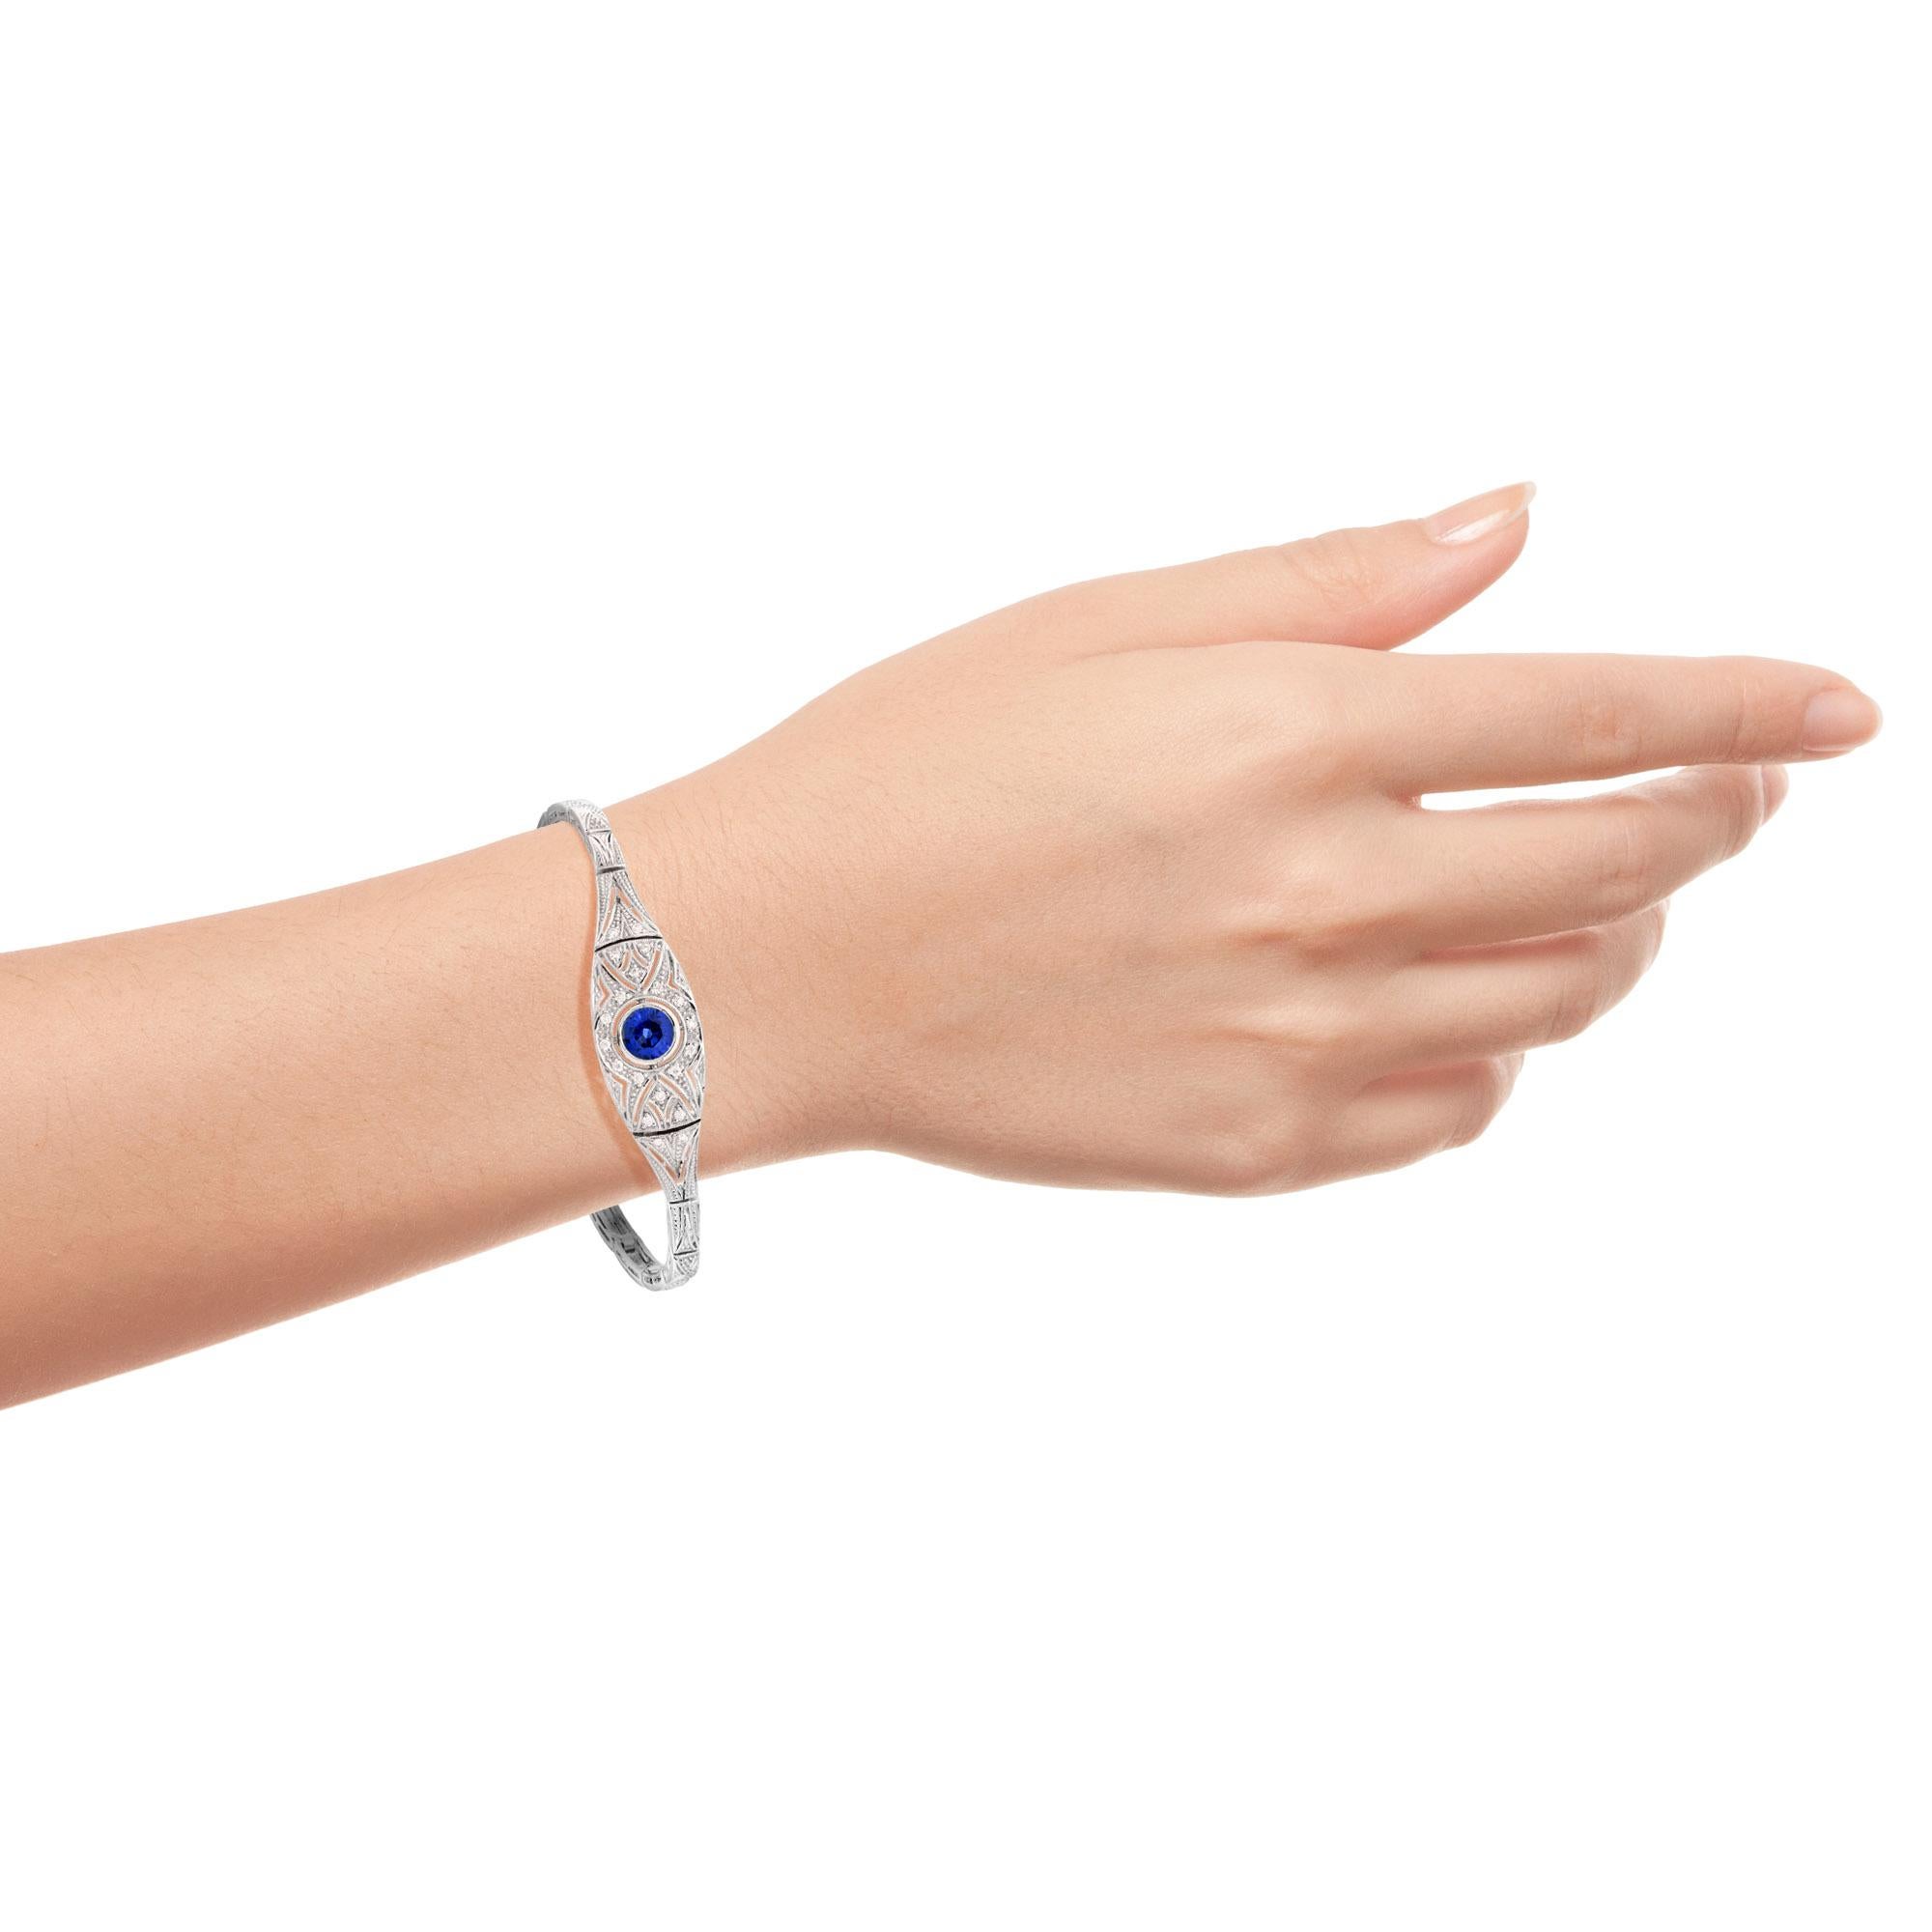 In the center of the bracelet is an approx. 1.2 carat round  blue sapphire that is the most wonderful blue in color. Highlighting the bracelet even more are a further 20 diamonds that really give this bracelet an elegant sparkle. The bracelet is